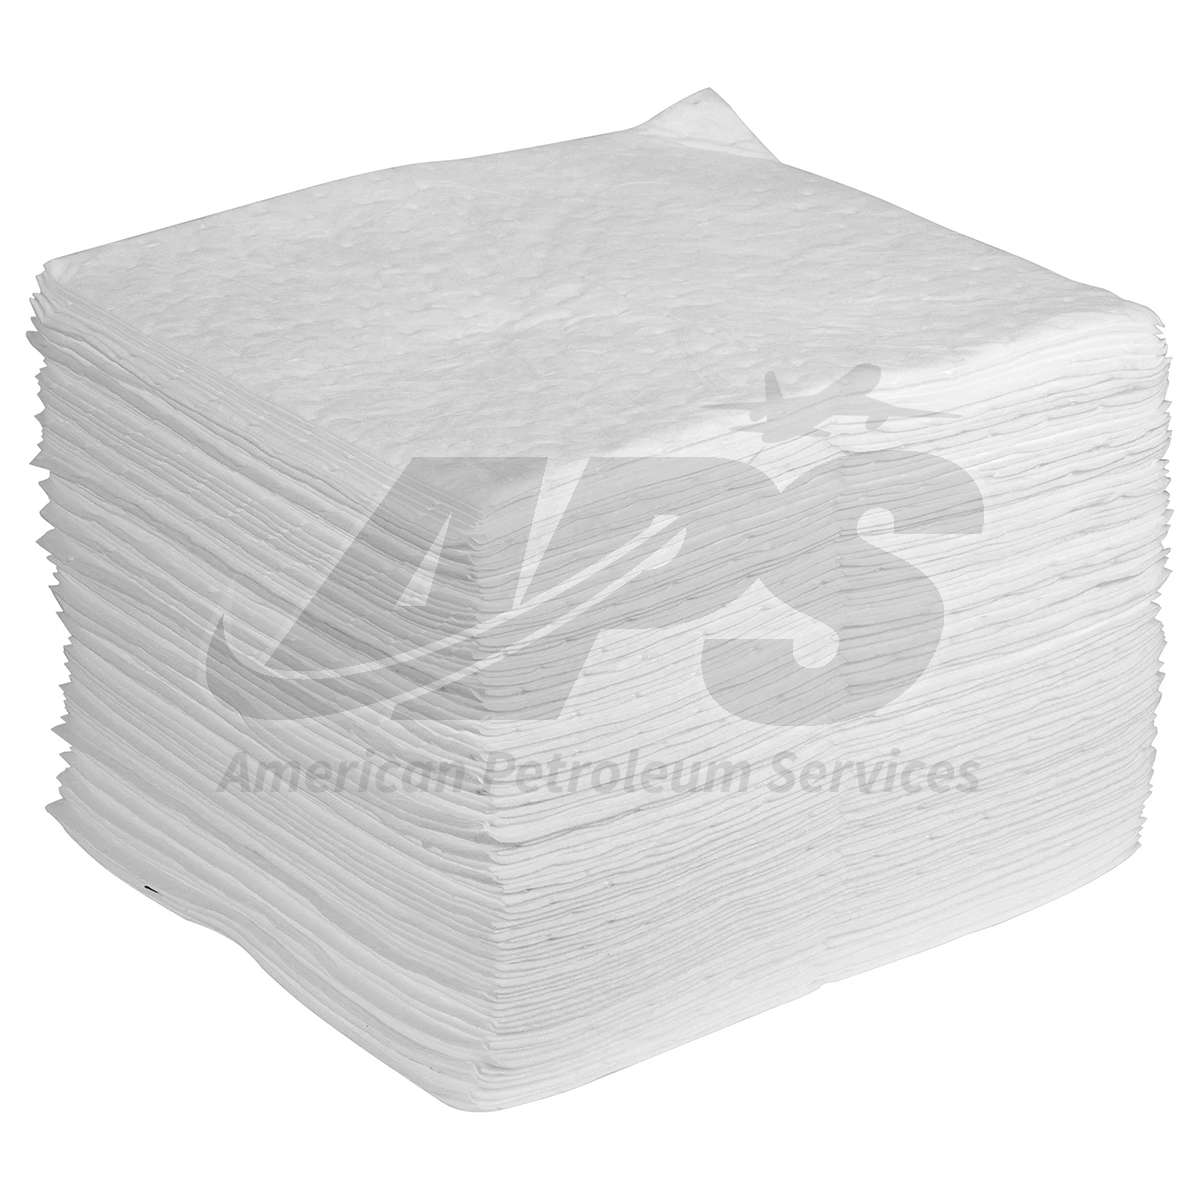 50 x Premium Oil Spill Absorbent Pads Oil Spill Protection 